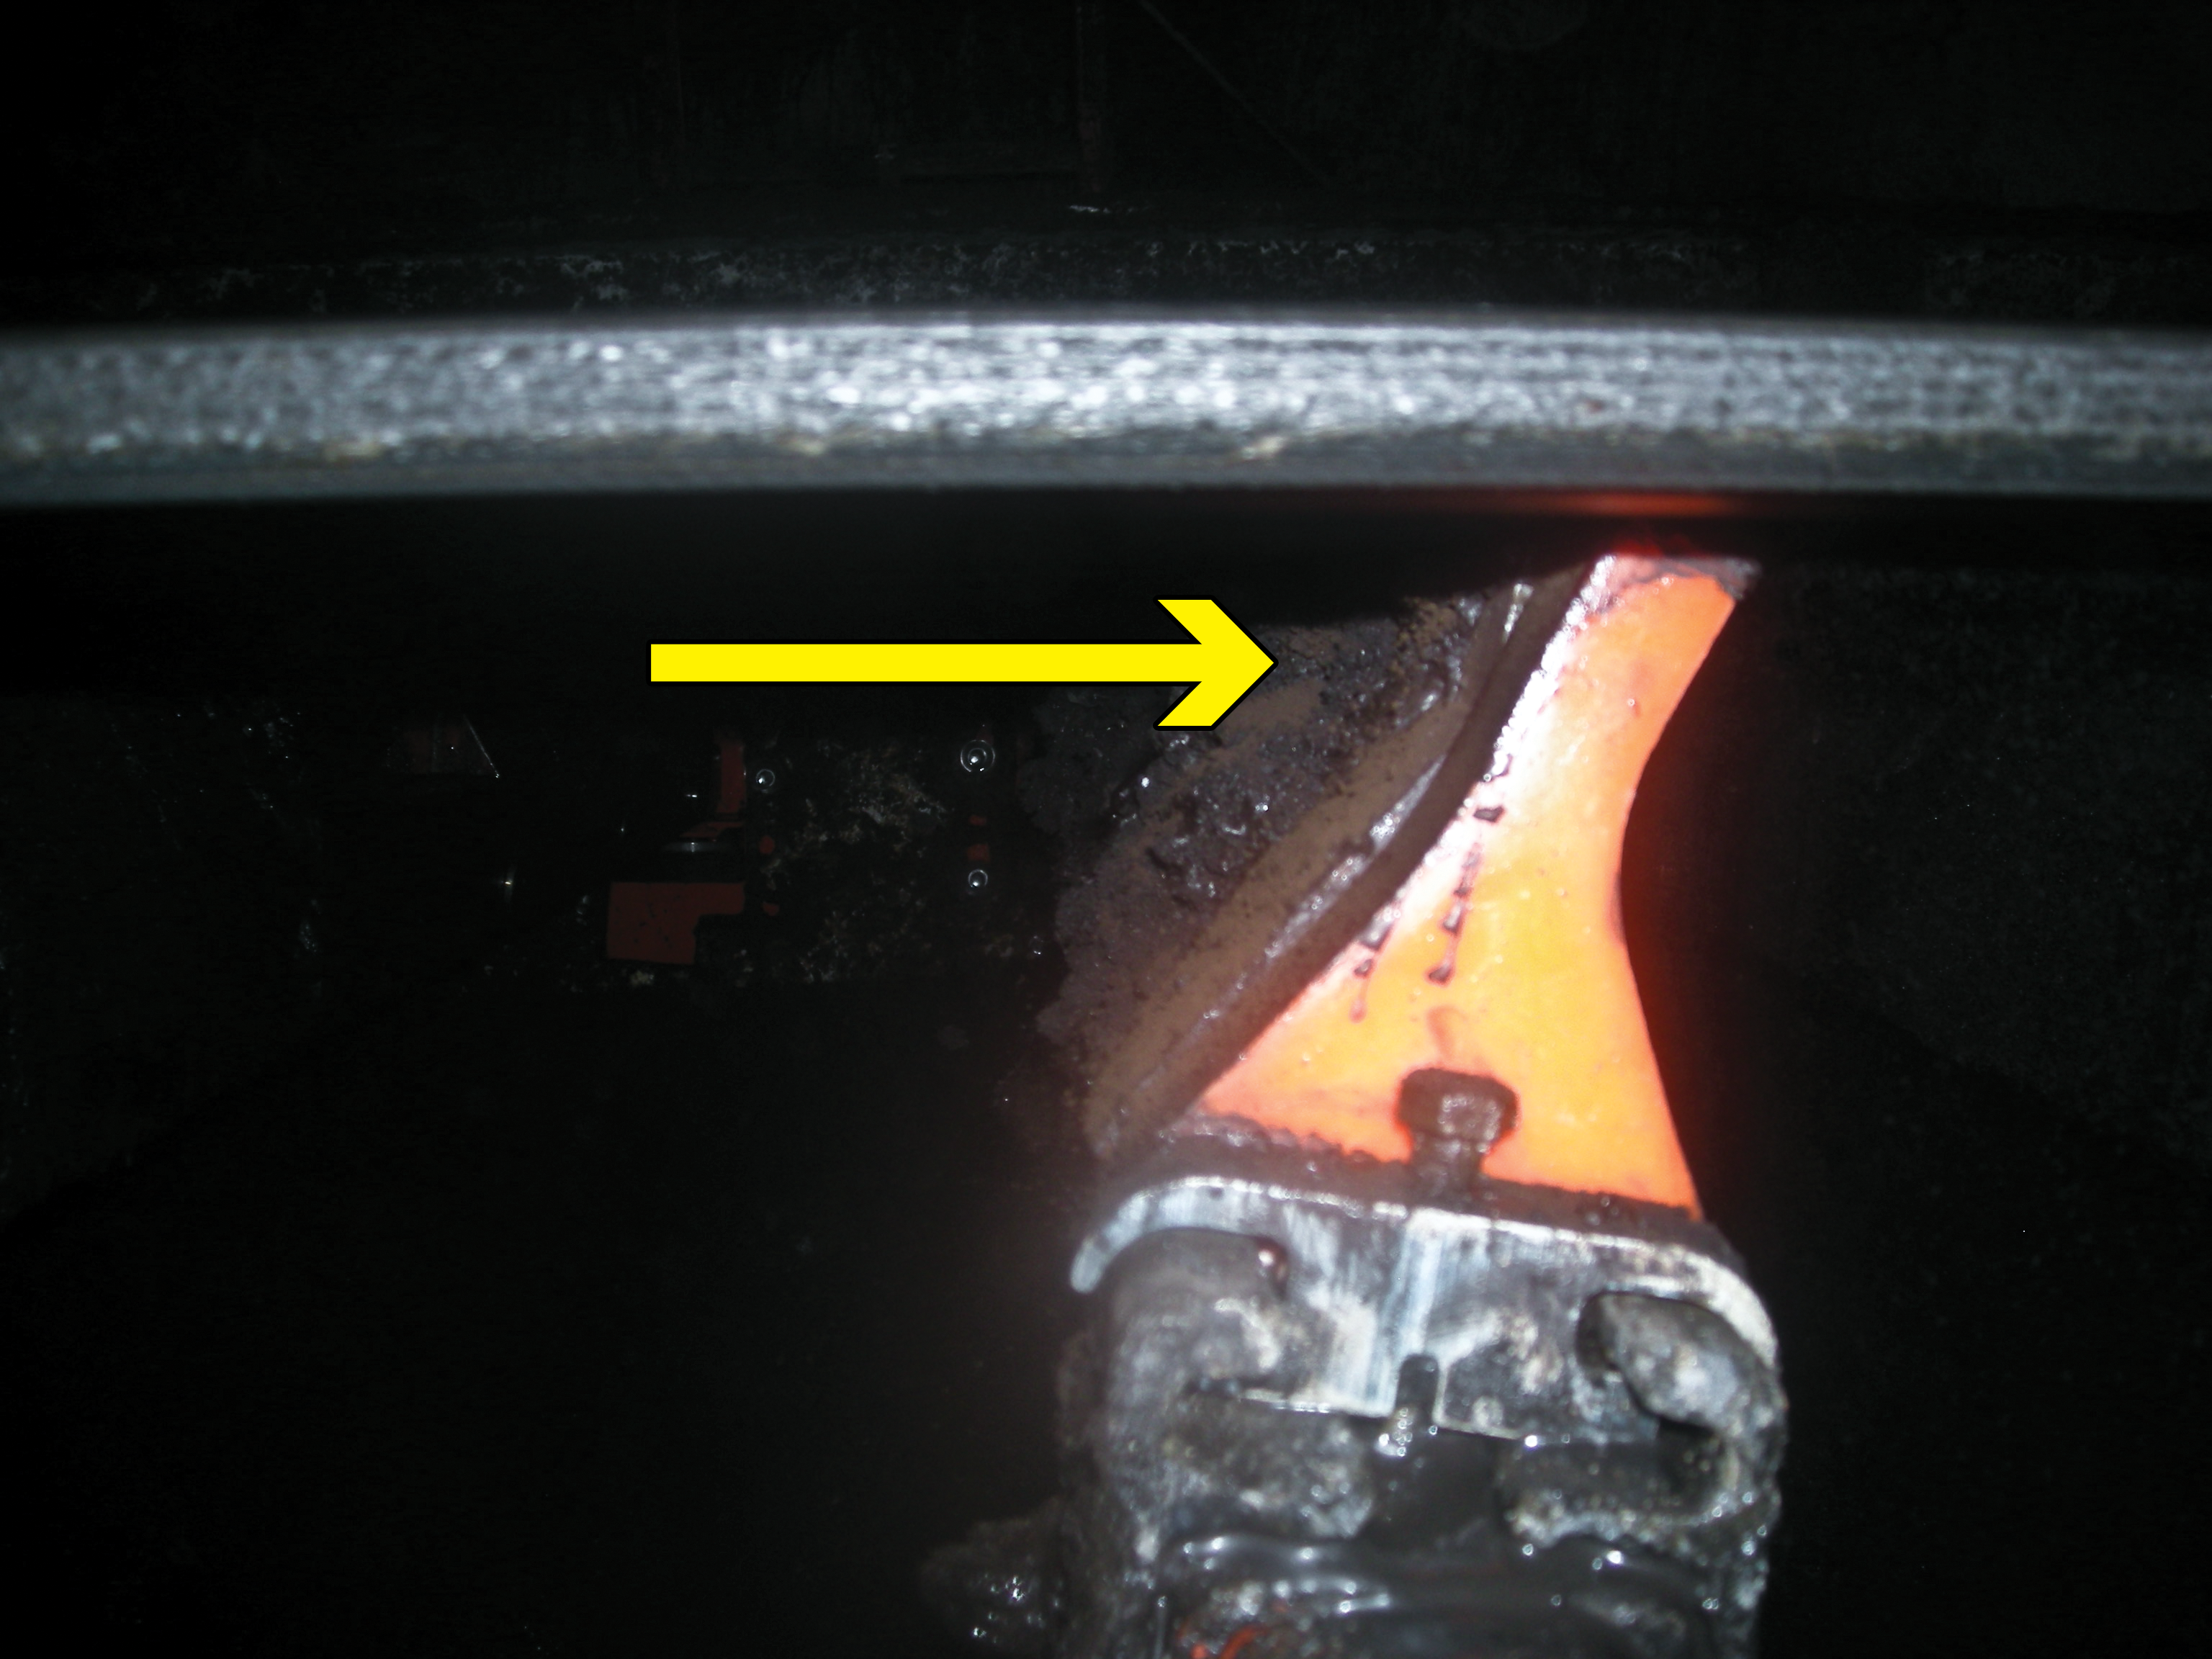 Secondary belt cleaner at a scraping, or negative-rake, angle.